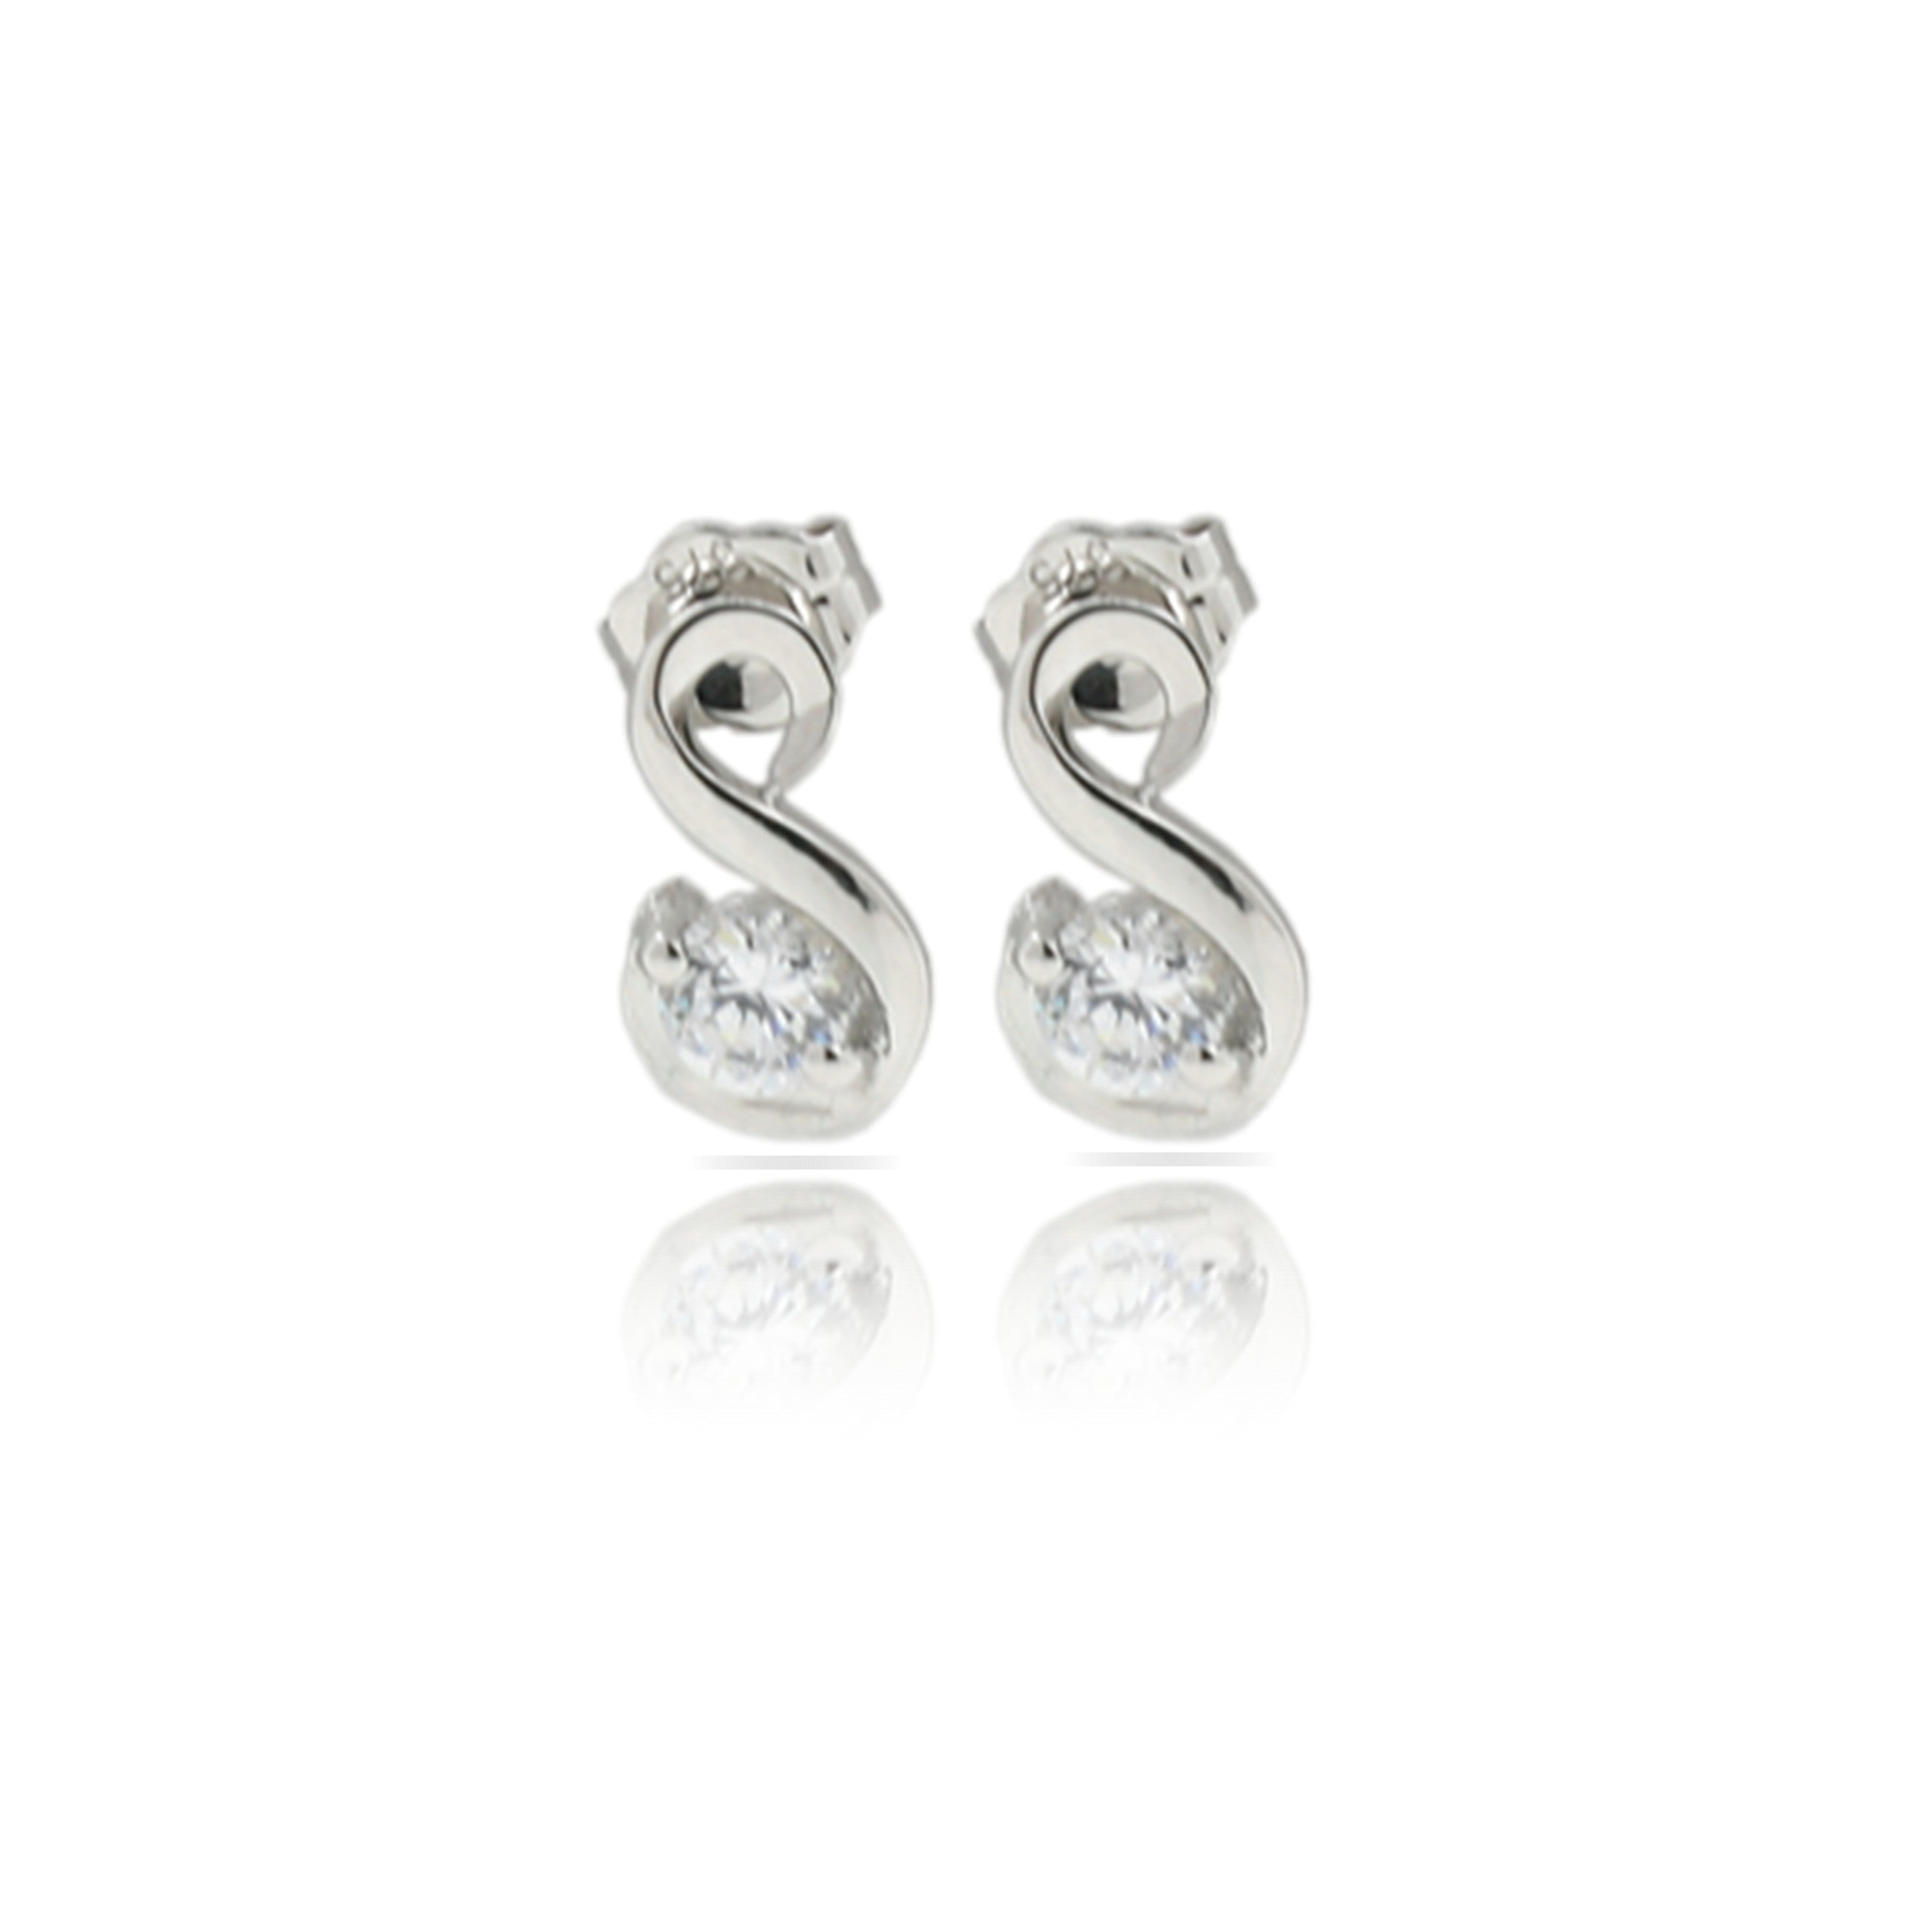 9ct White Gold Fancy Shaped Stud Earrings with 4mm Cubic Zirconia